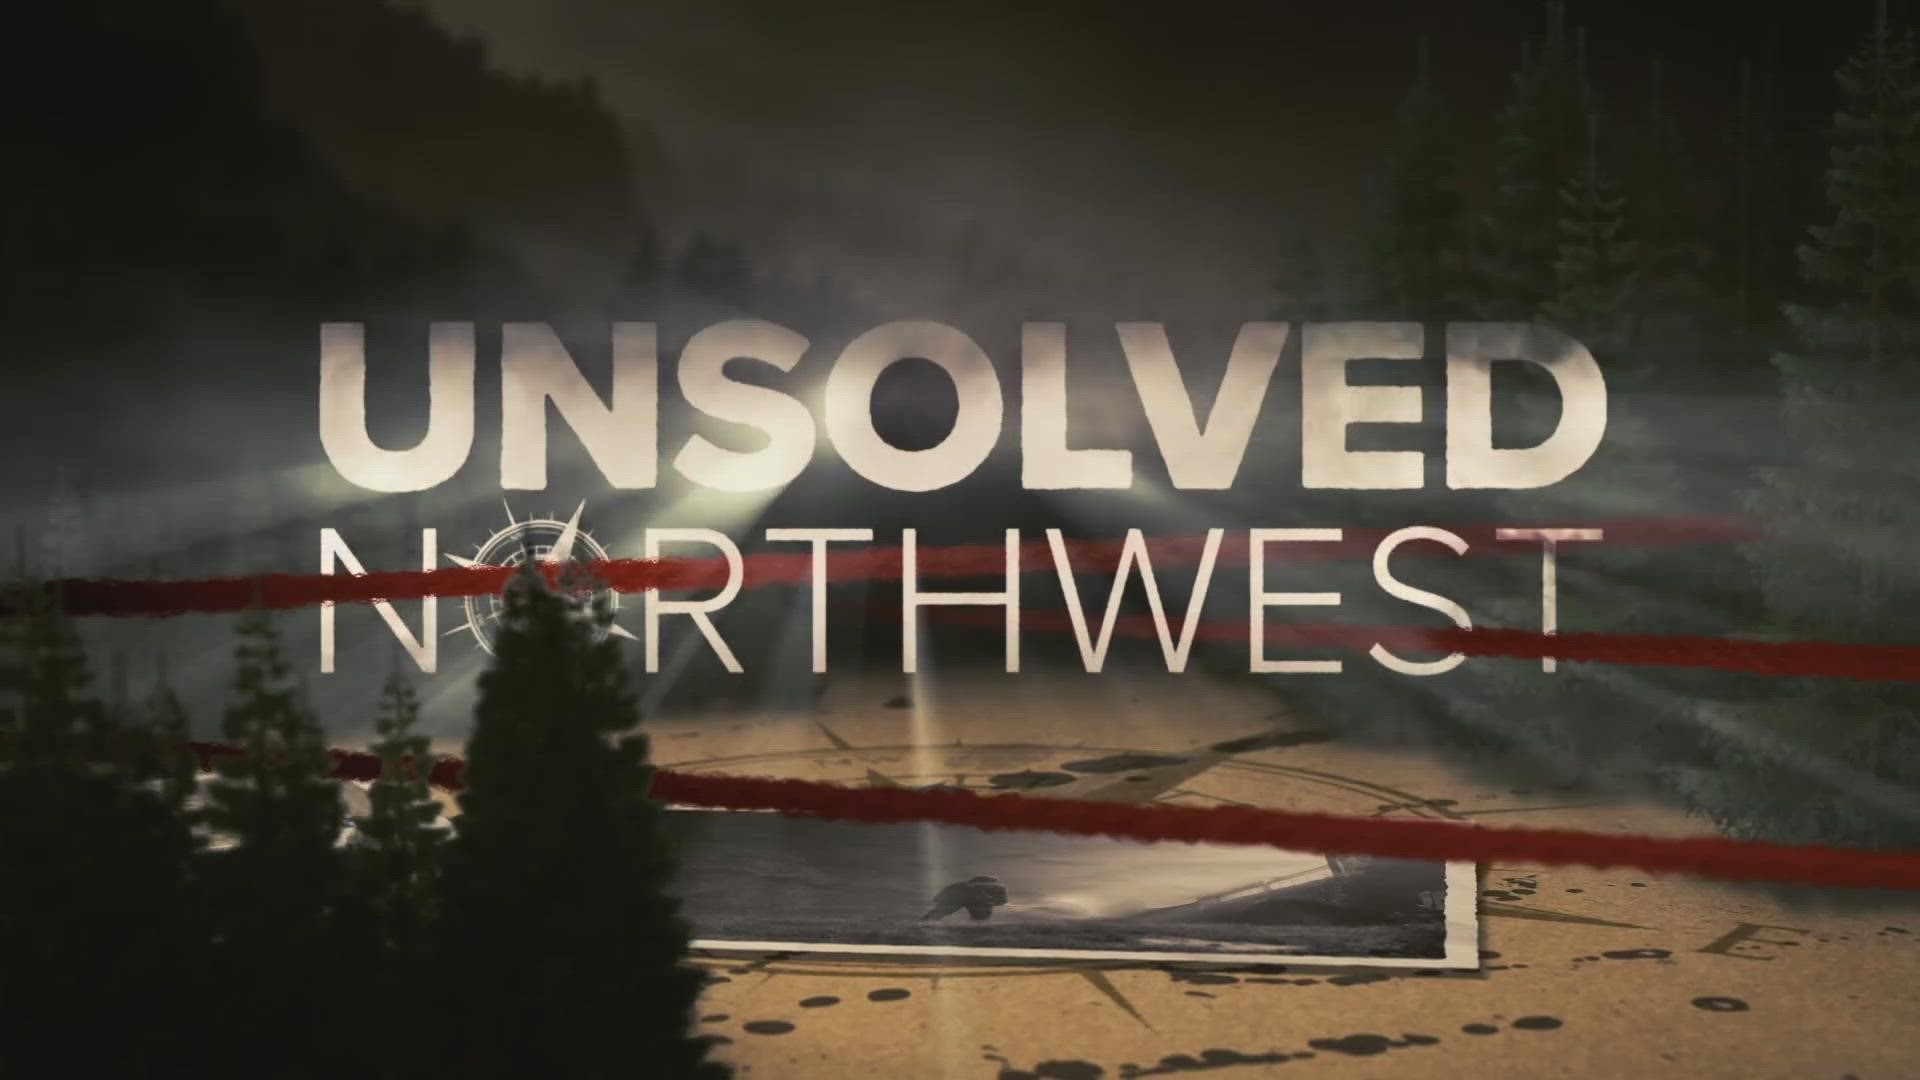 A look at some of the most mysterious cold cases covered by the Unsolved Northwest team in the past year.